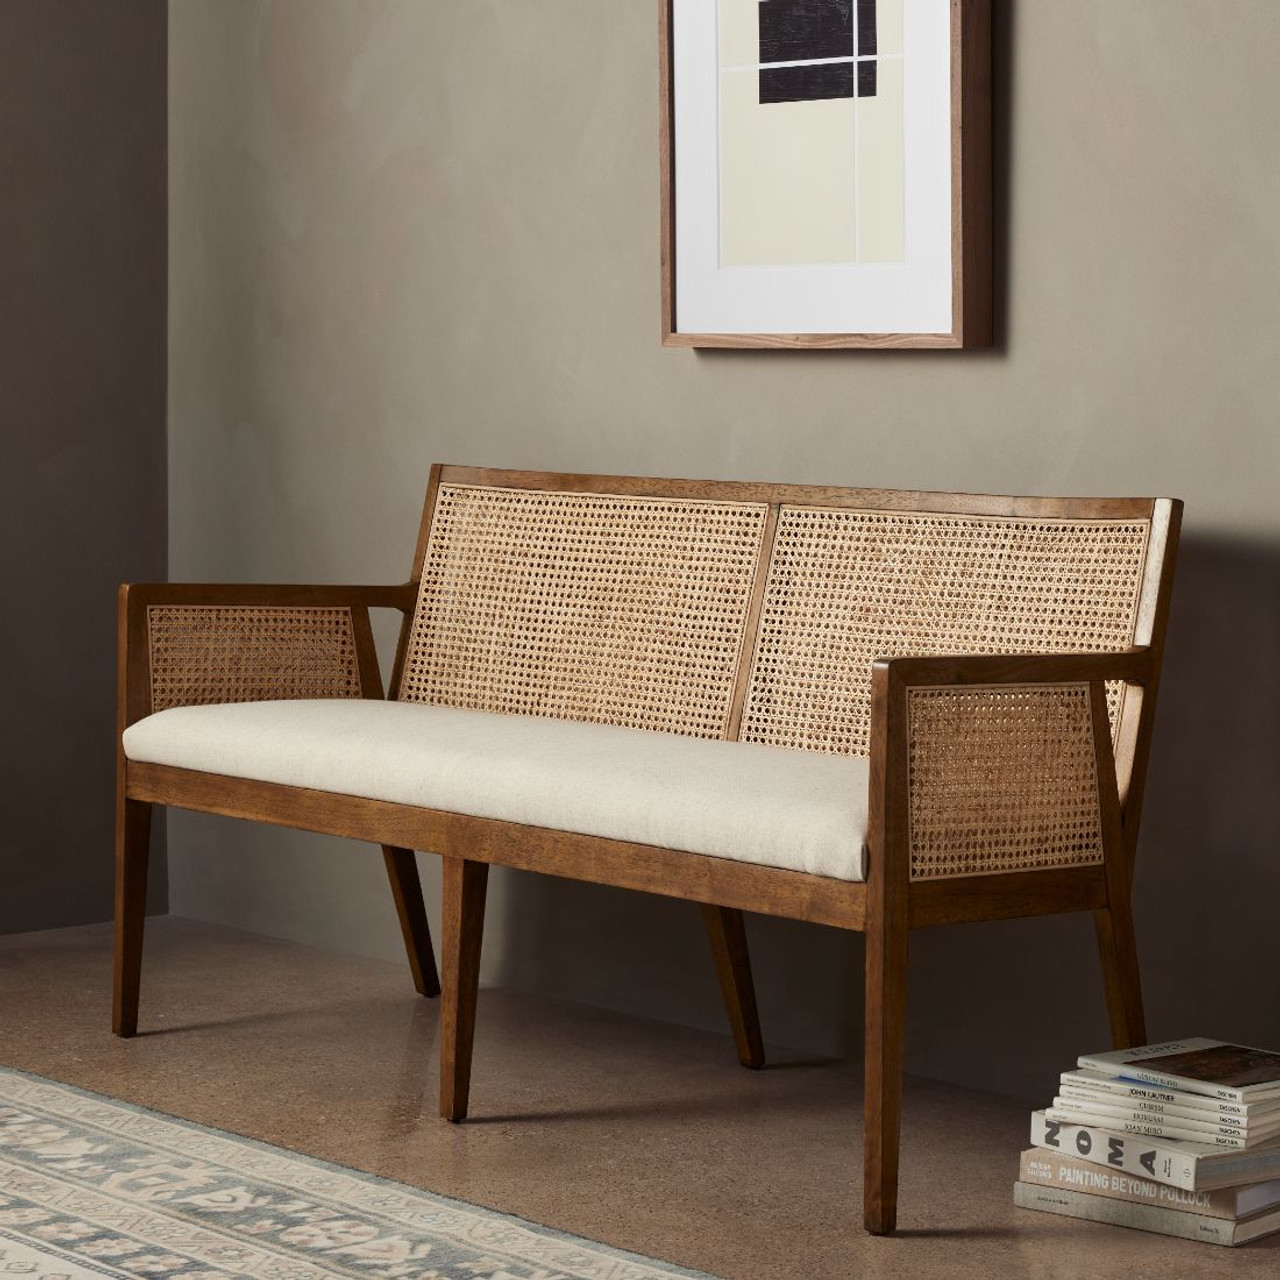 Antonia Toasted Woven Cane Dining Bench Settee | Zin Home